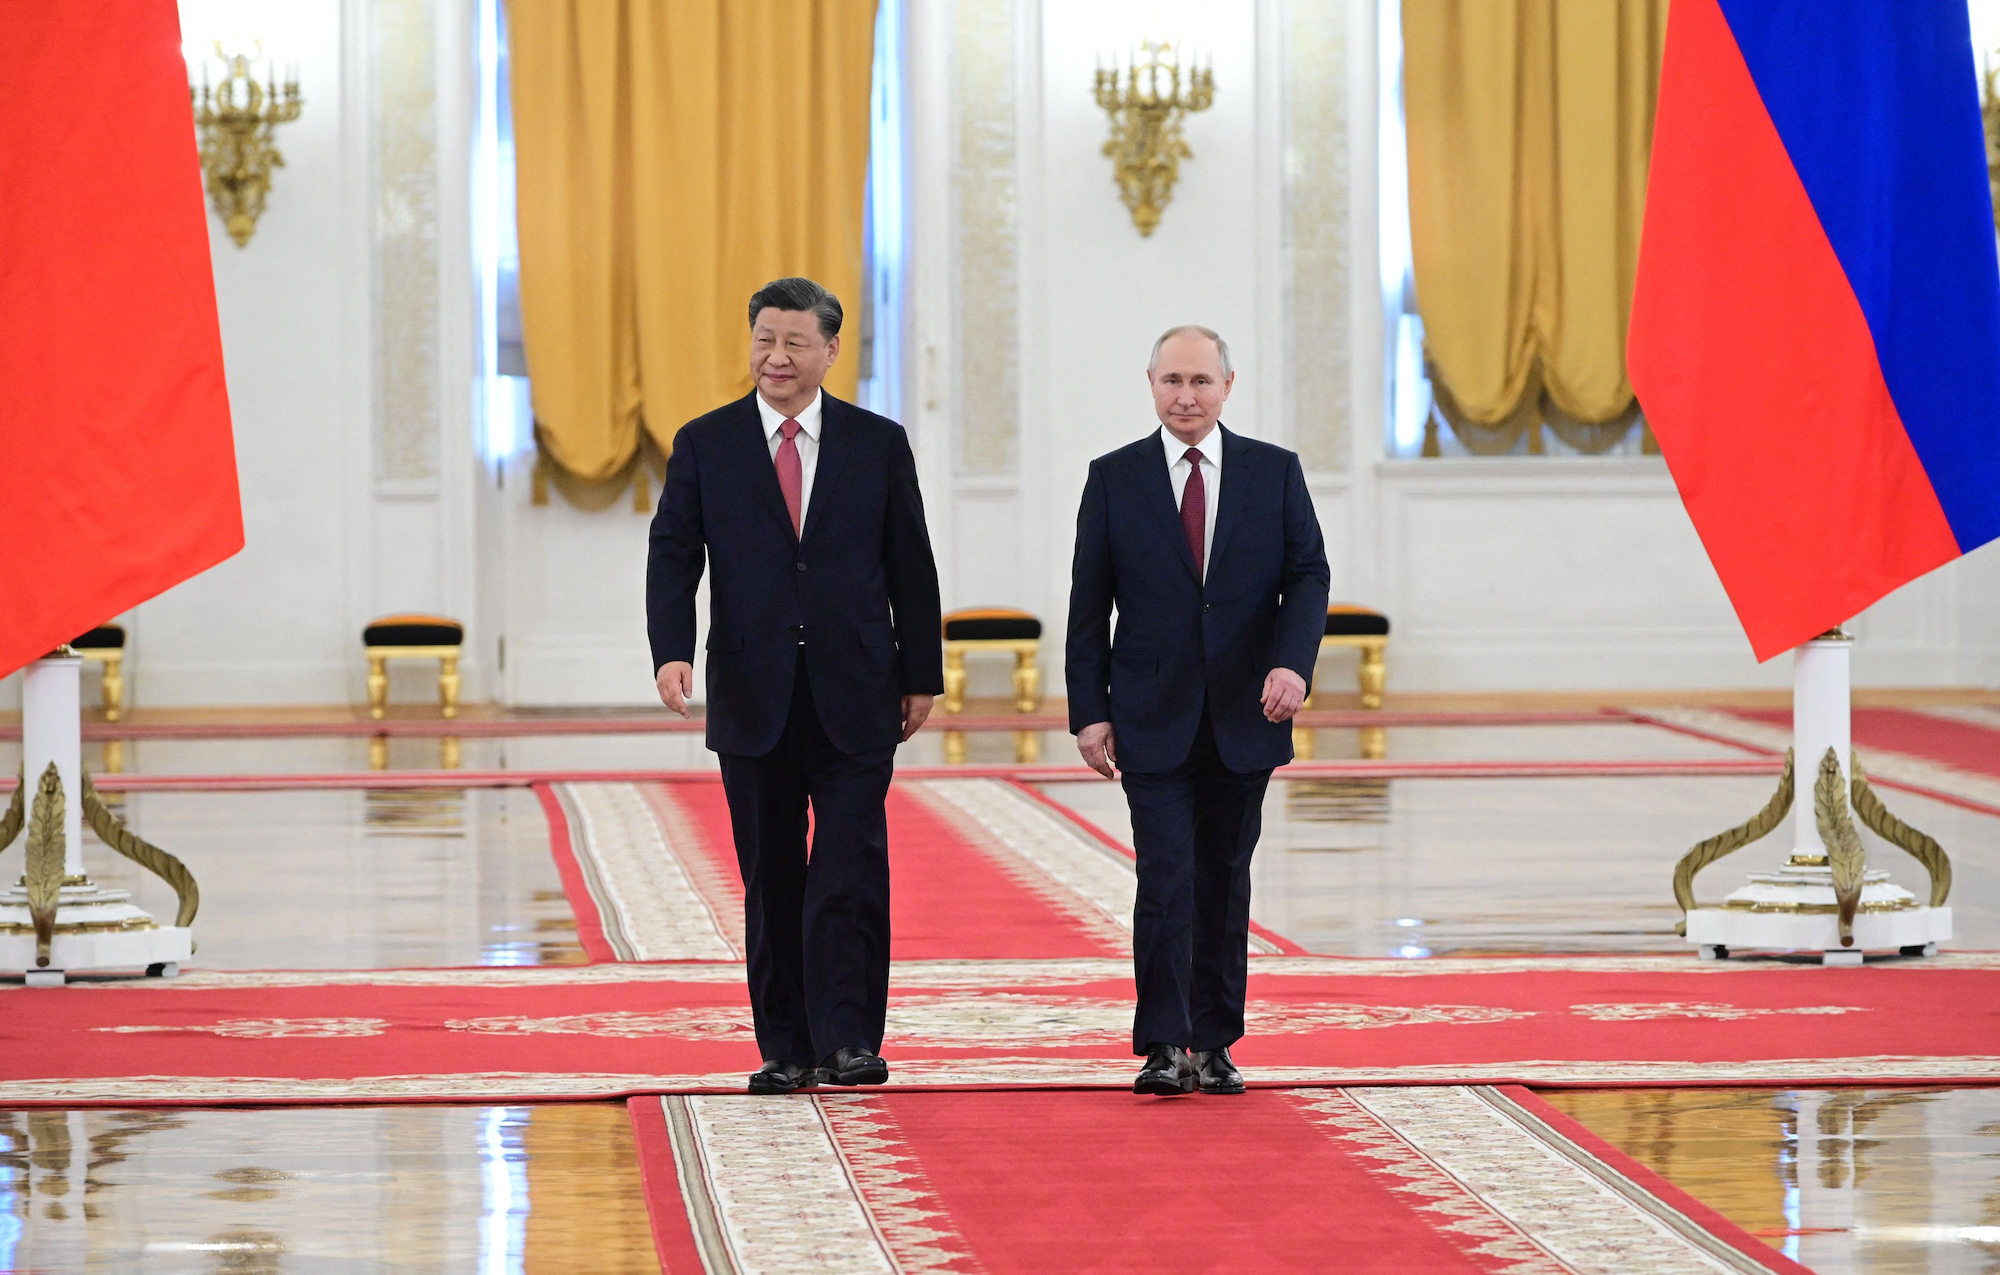 Russian President Vladimir Putin meets with Chinese leader Xi Jinping at the Kremlin in Moscow on Tuesday.